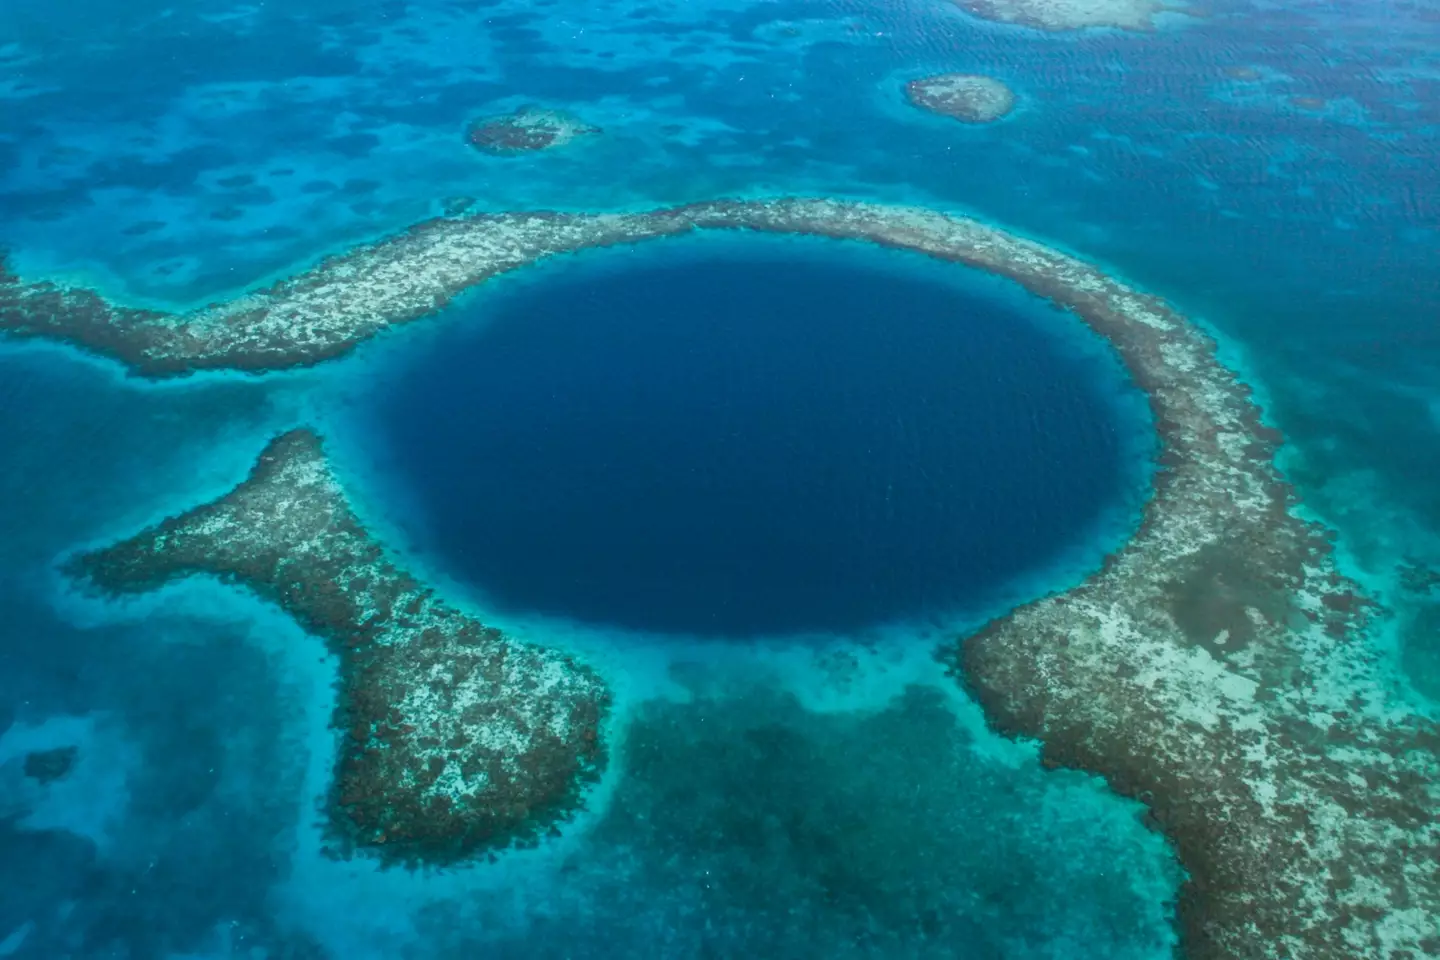 The Great Blue Hole is some 60 miles off the coast of Belize. (Elliott Pelling/Getty Images)